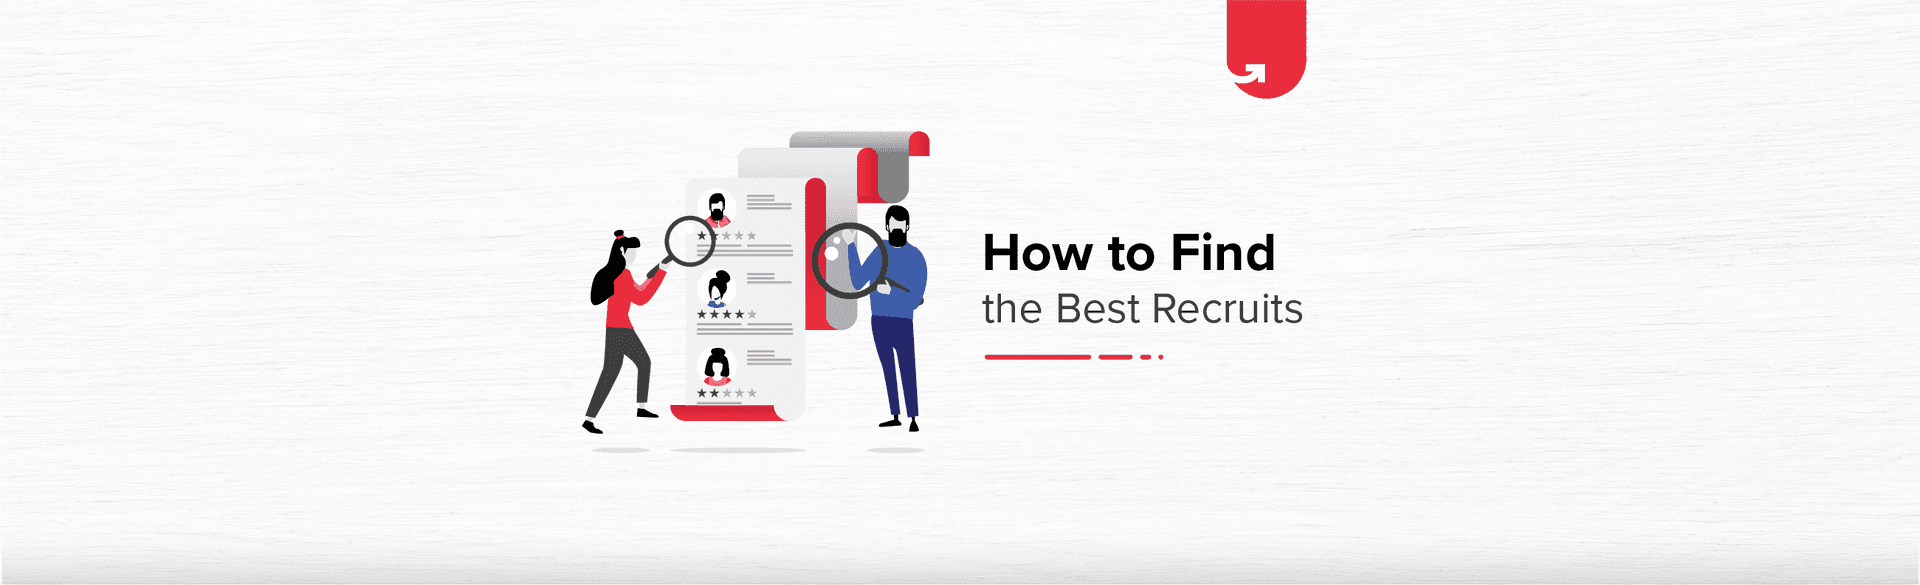 5 Tips to Hire the Best Recruits